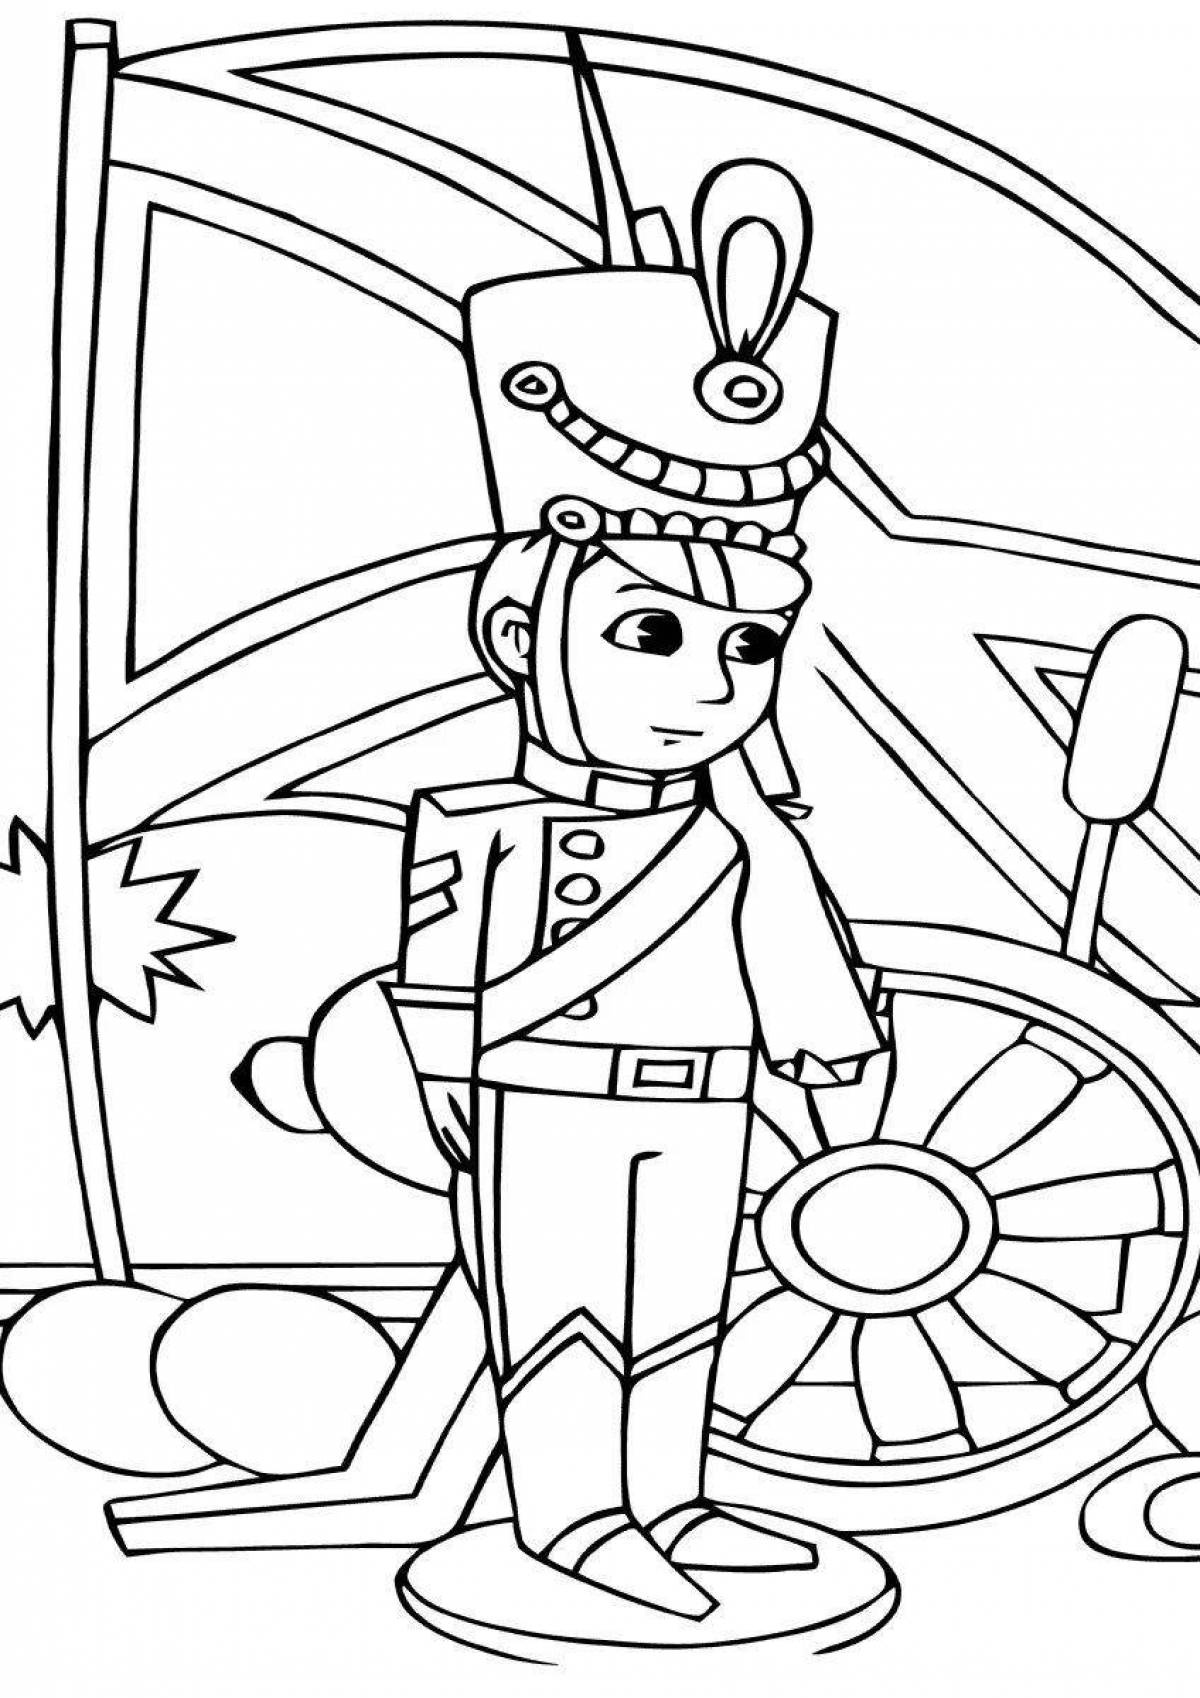 Strong Tin Soldier Coloring Page